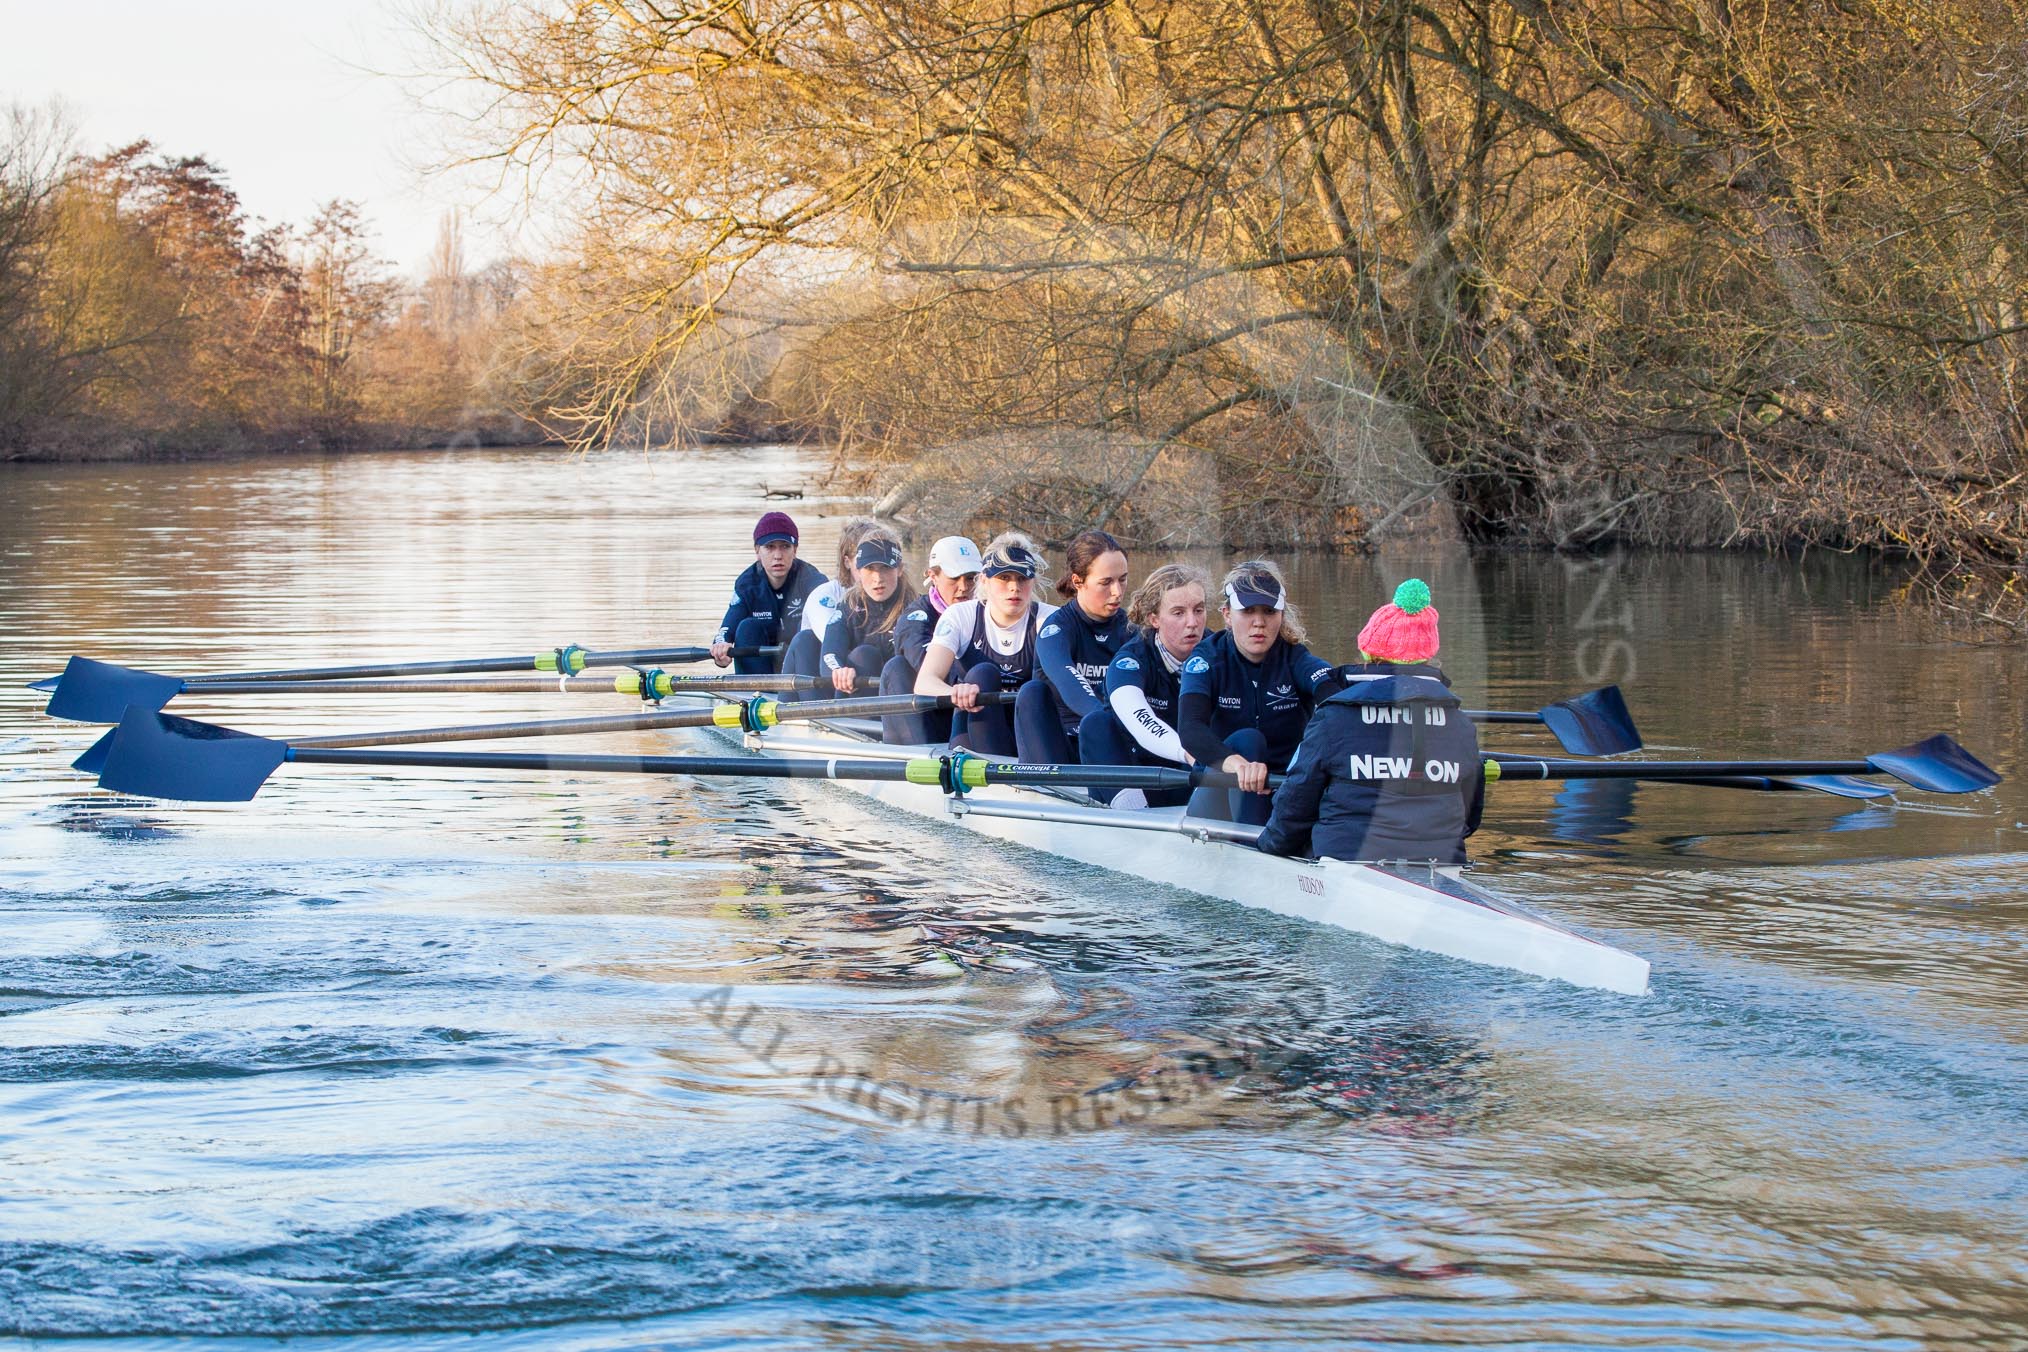 The Boat Race season 2013 - OUWBC training: The OUWBC Blue Boat during the training session - bow Mariann Novak, Alice Carrington-Windo, Mary Foord-Weston, Jo Lee, Amy Varney, Harriet Keane, Anastasia Chitty, stroke Maxie Scheske, and cox Katie Apfelbaum..
River Thames,
Wallingford,
Oxfordshire,
United Kingdom,
on 13 March 2013 at 17:16, image #122